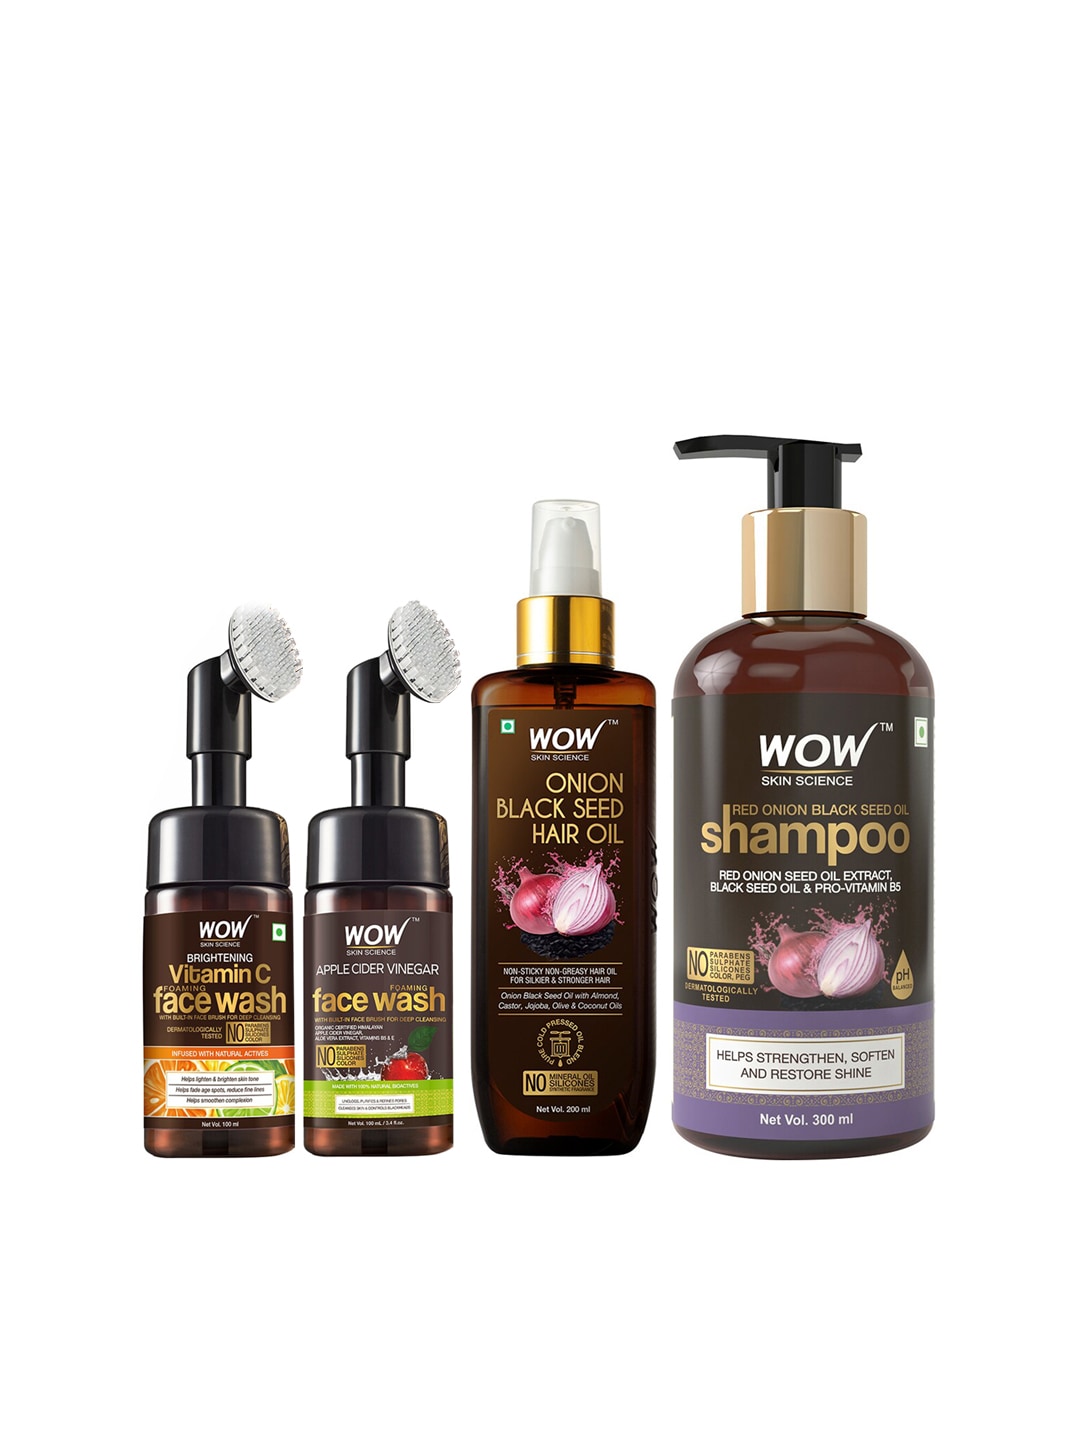 WOW SKIN SCIENCE Set of Hair Oil - Shampoo & 2 Face Wash Price in India